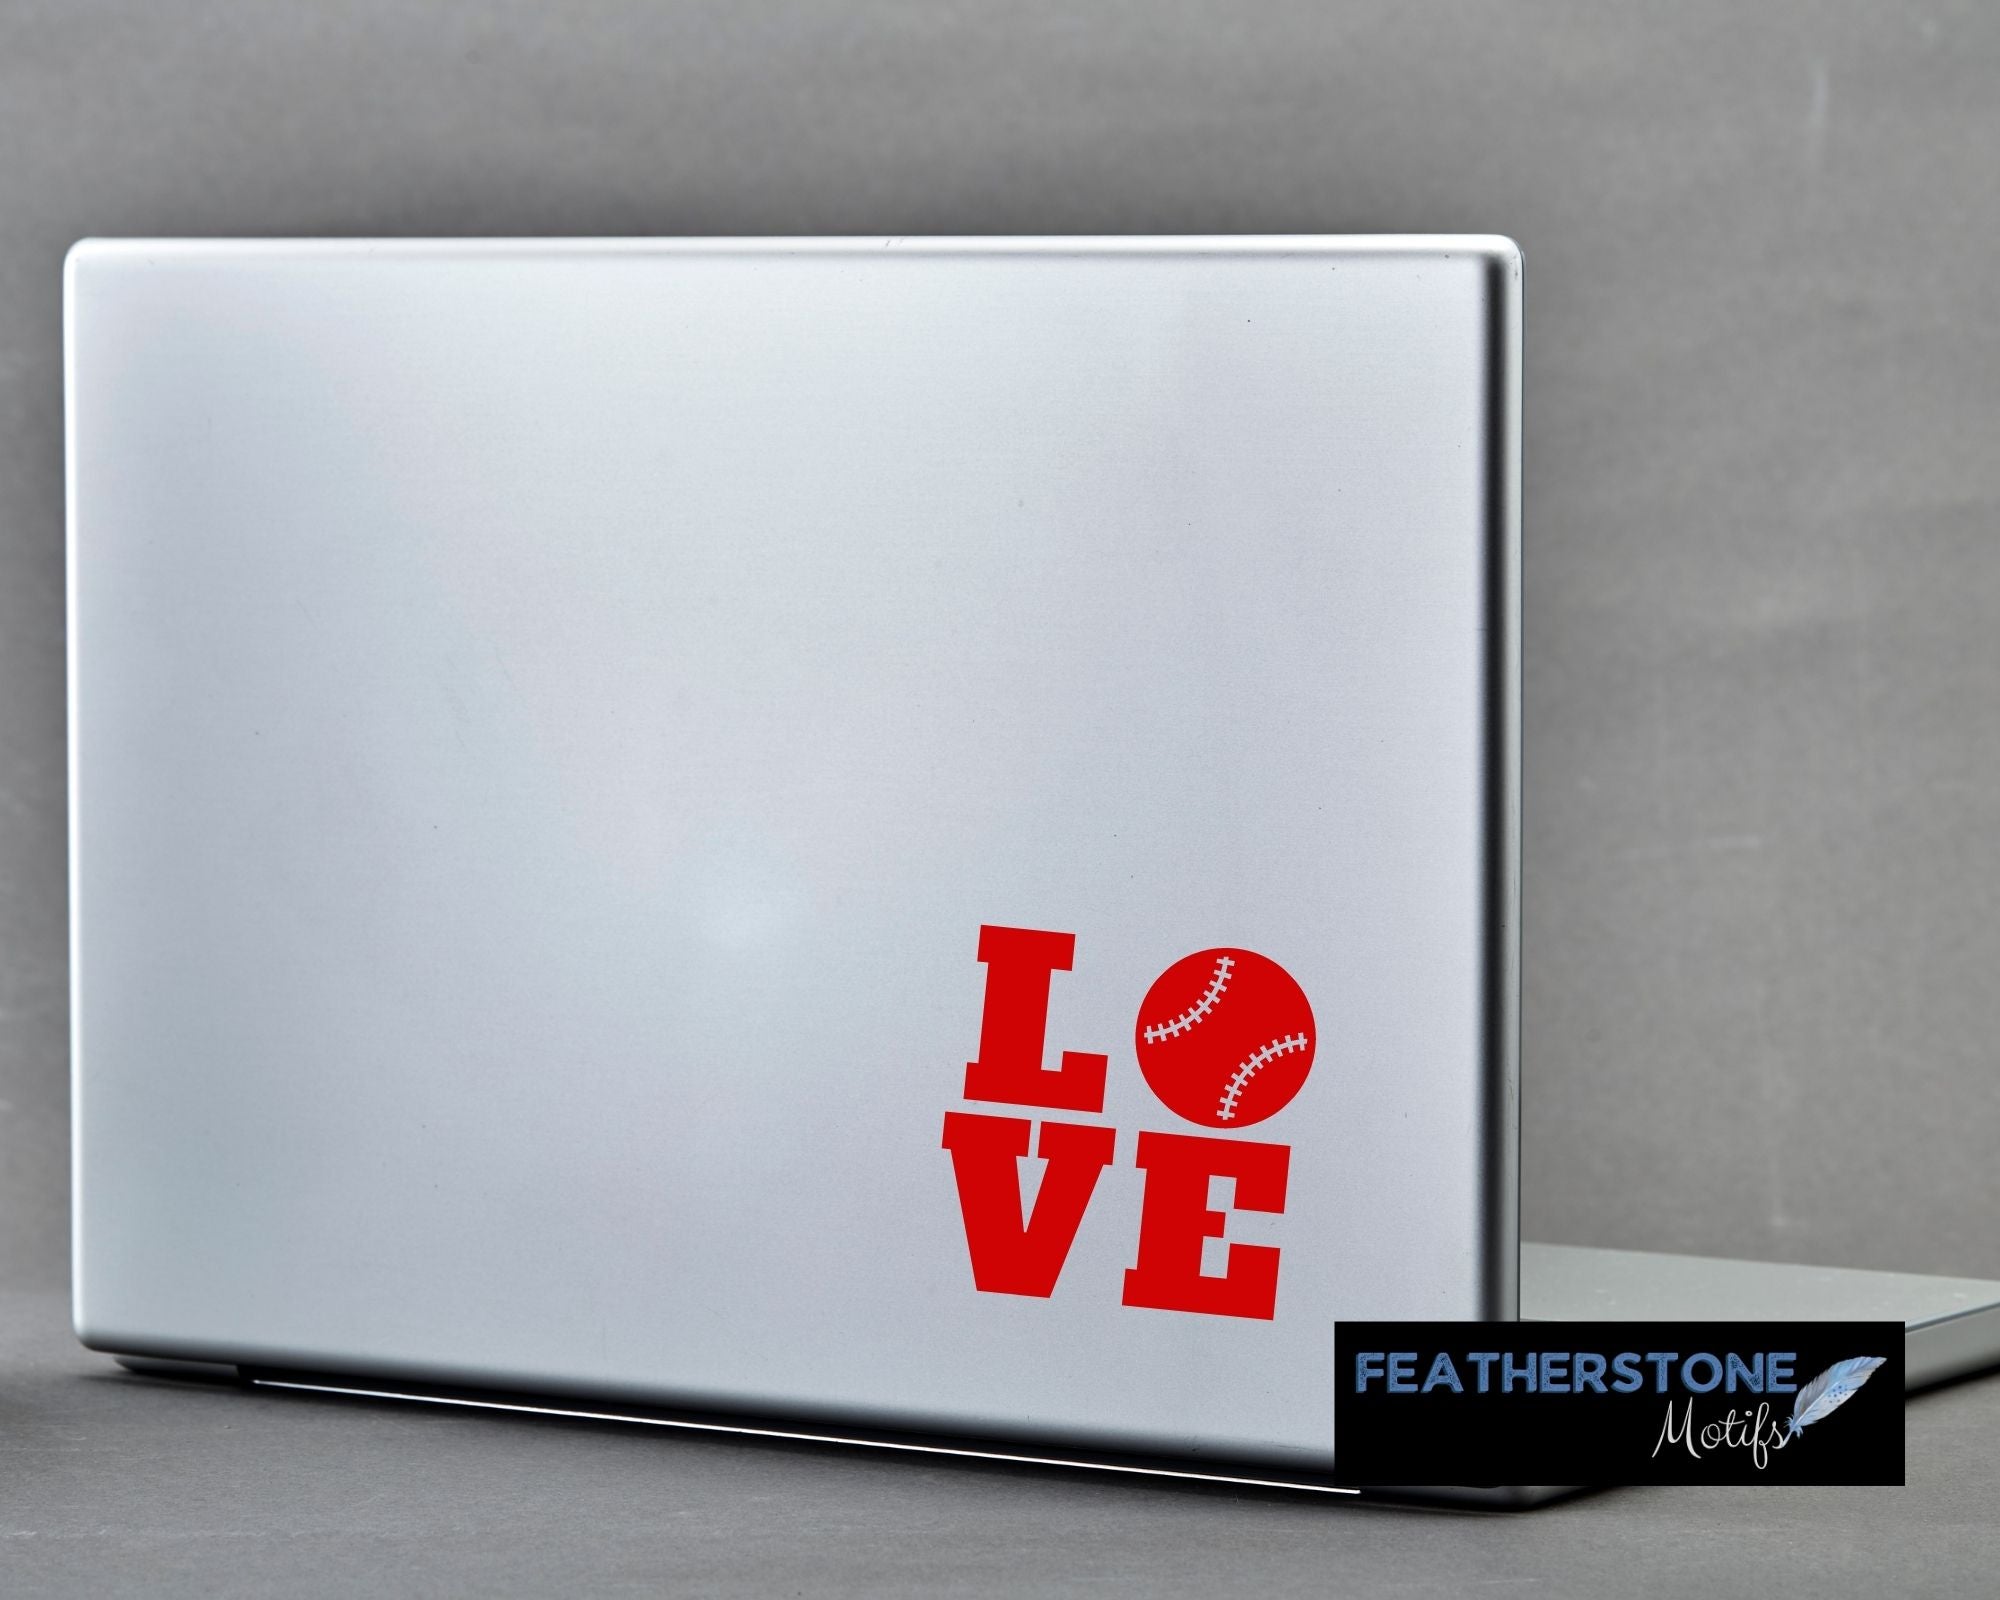 Love baseball? Then show it with this baseball love square vinyl decal! Available in 4 sizes and 10 colors, these vinyl decals make great gifts for everyone. This image shows the baseball love square decal on the back of an open laptop. 